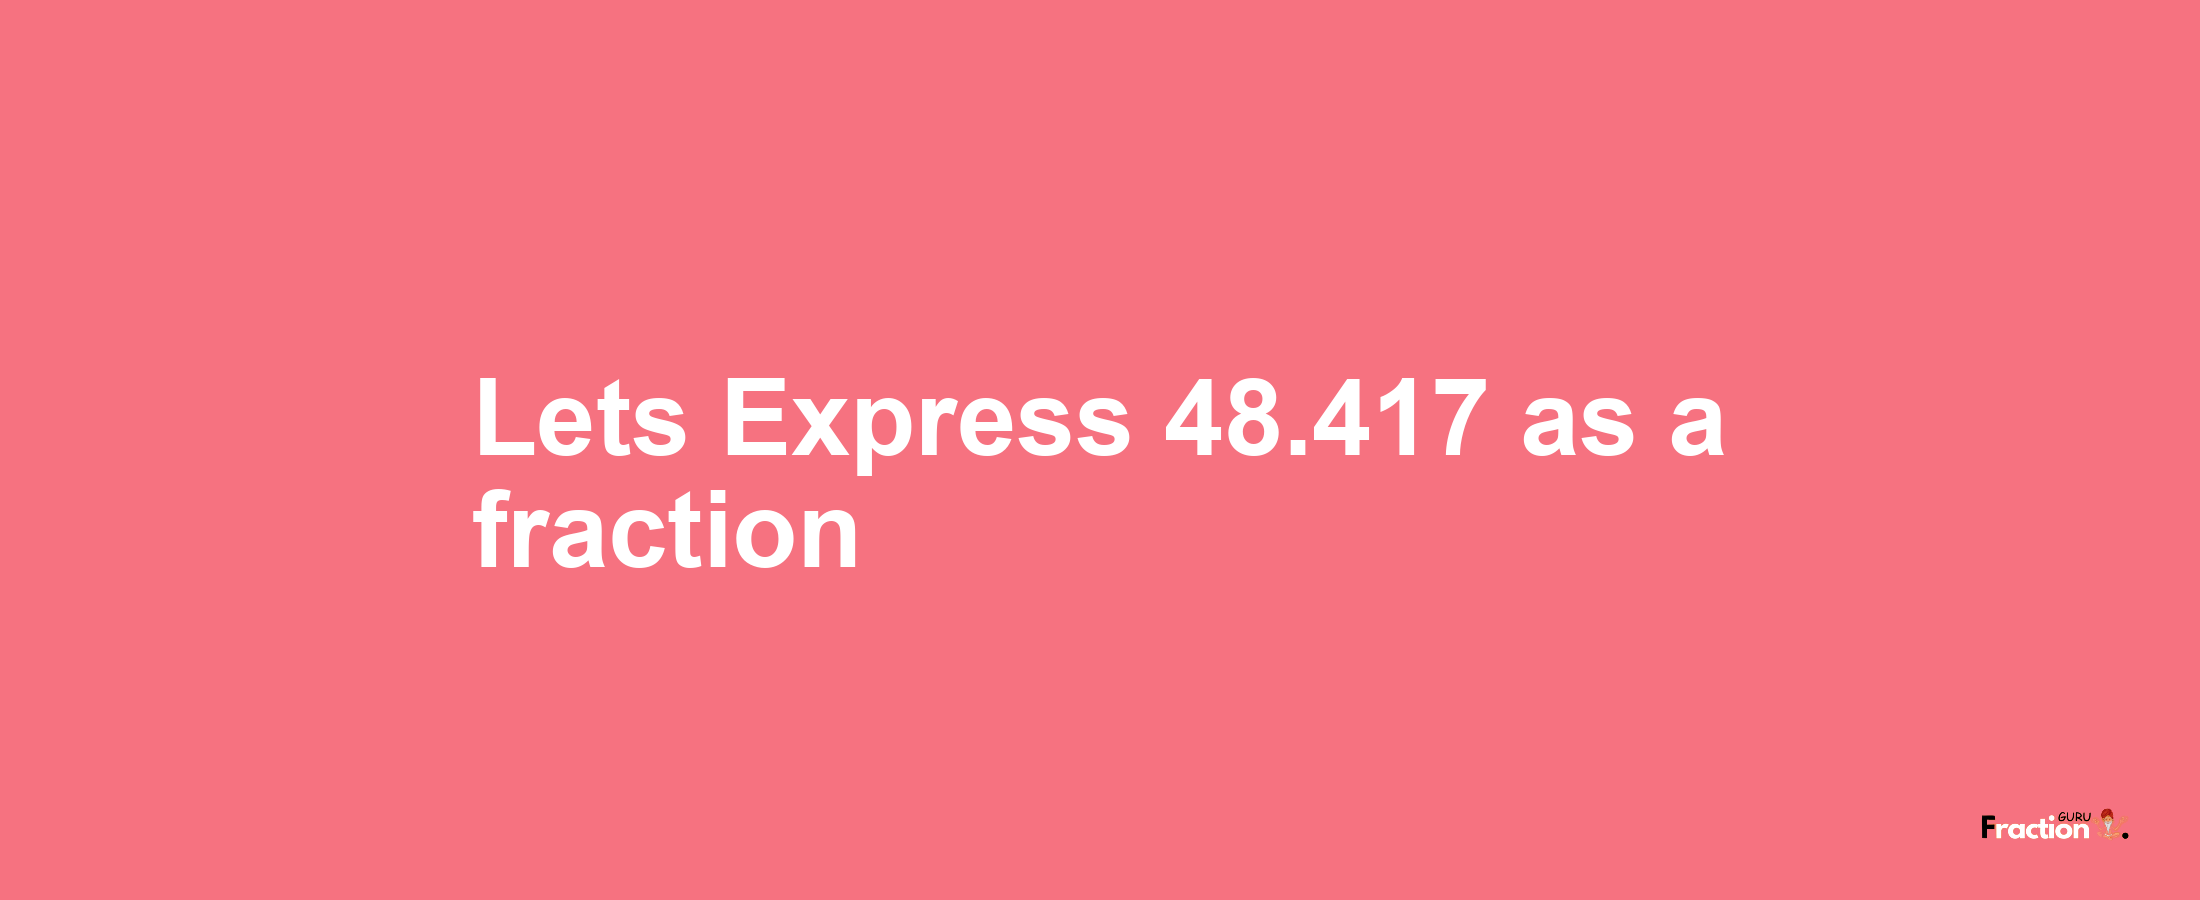 Lets Express 48.417 as afraction